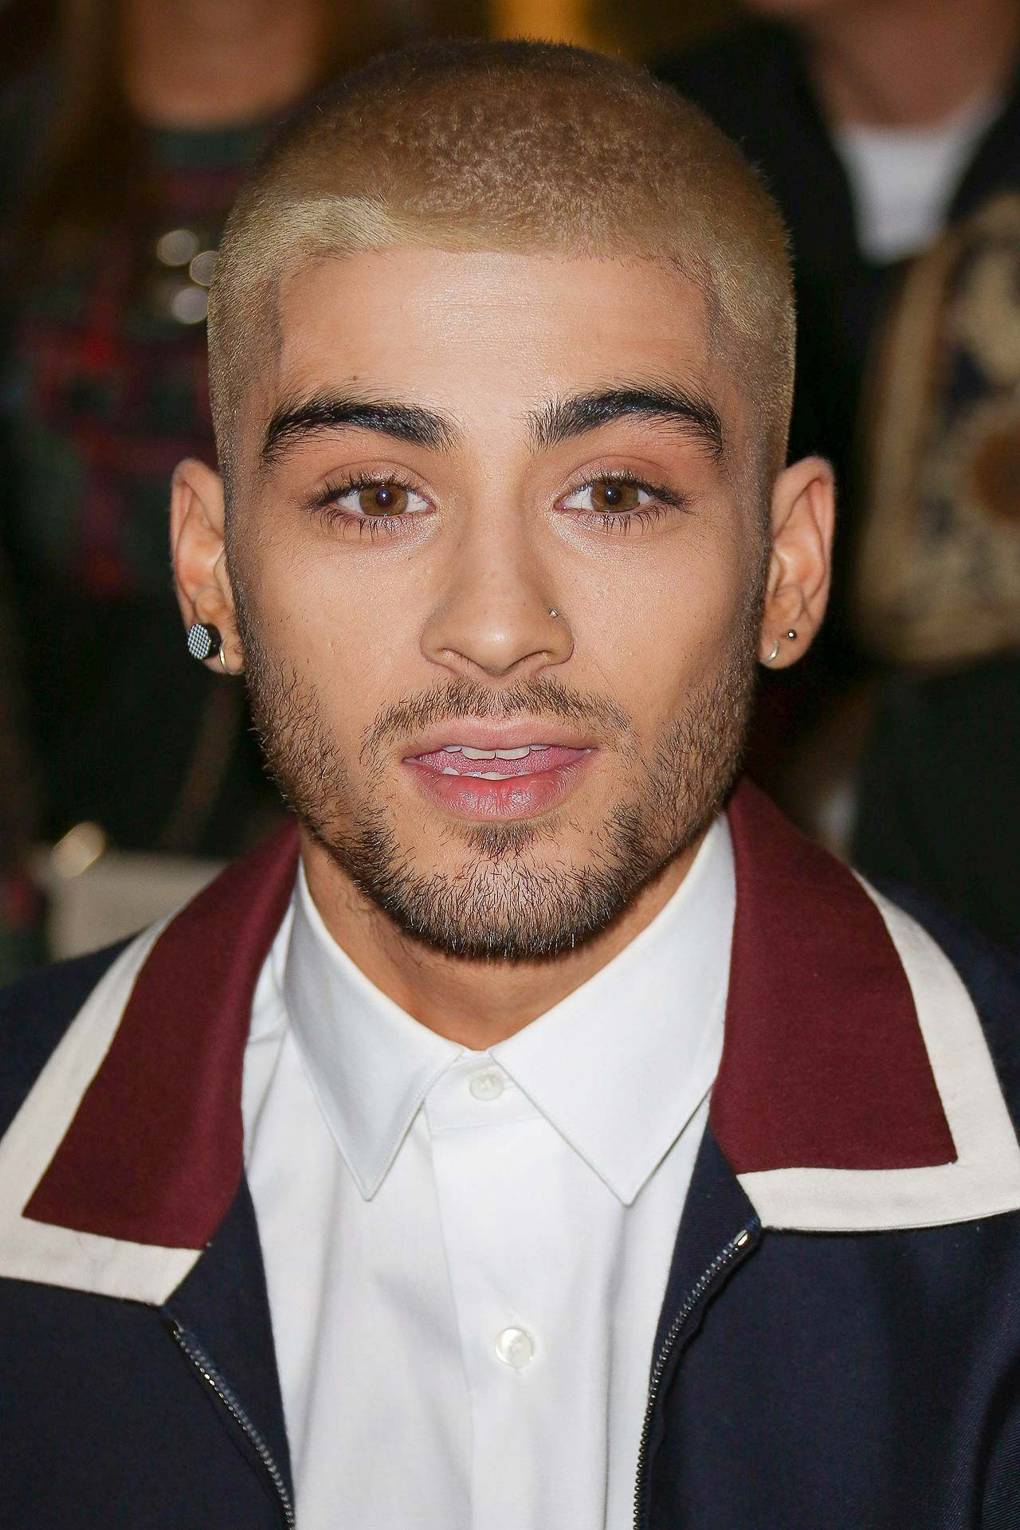 zayn malik twitter: perrie edwards relationship news and